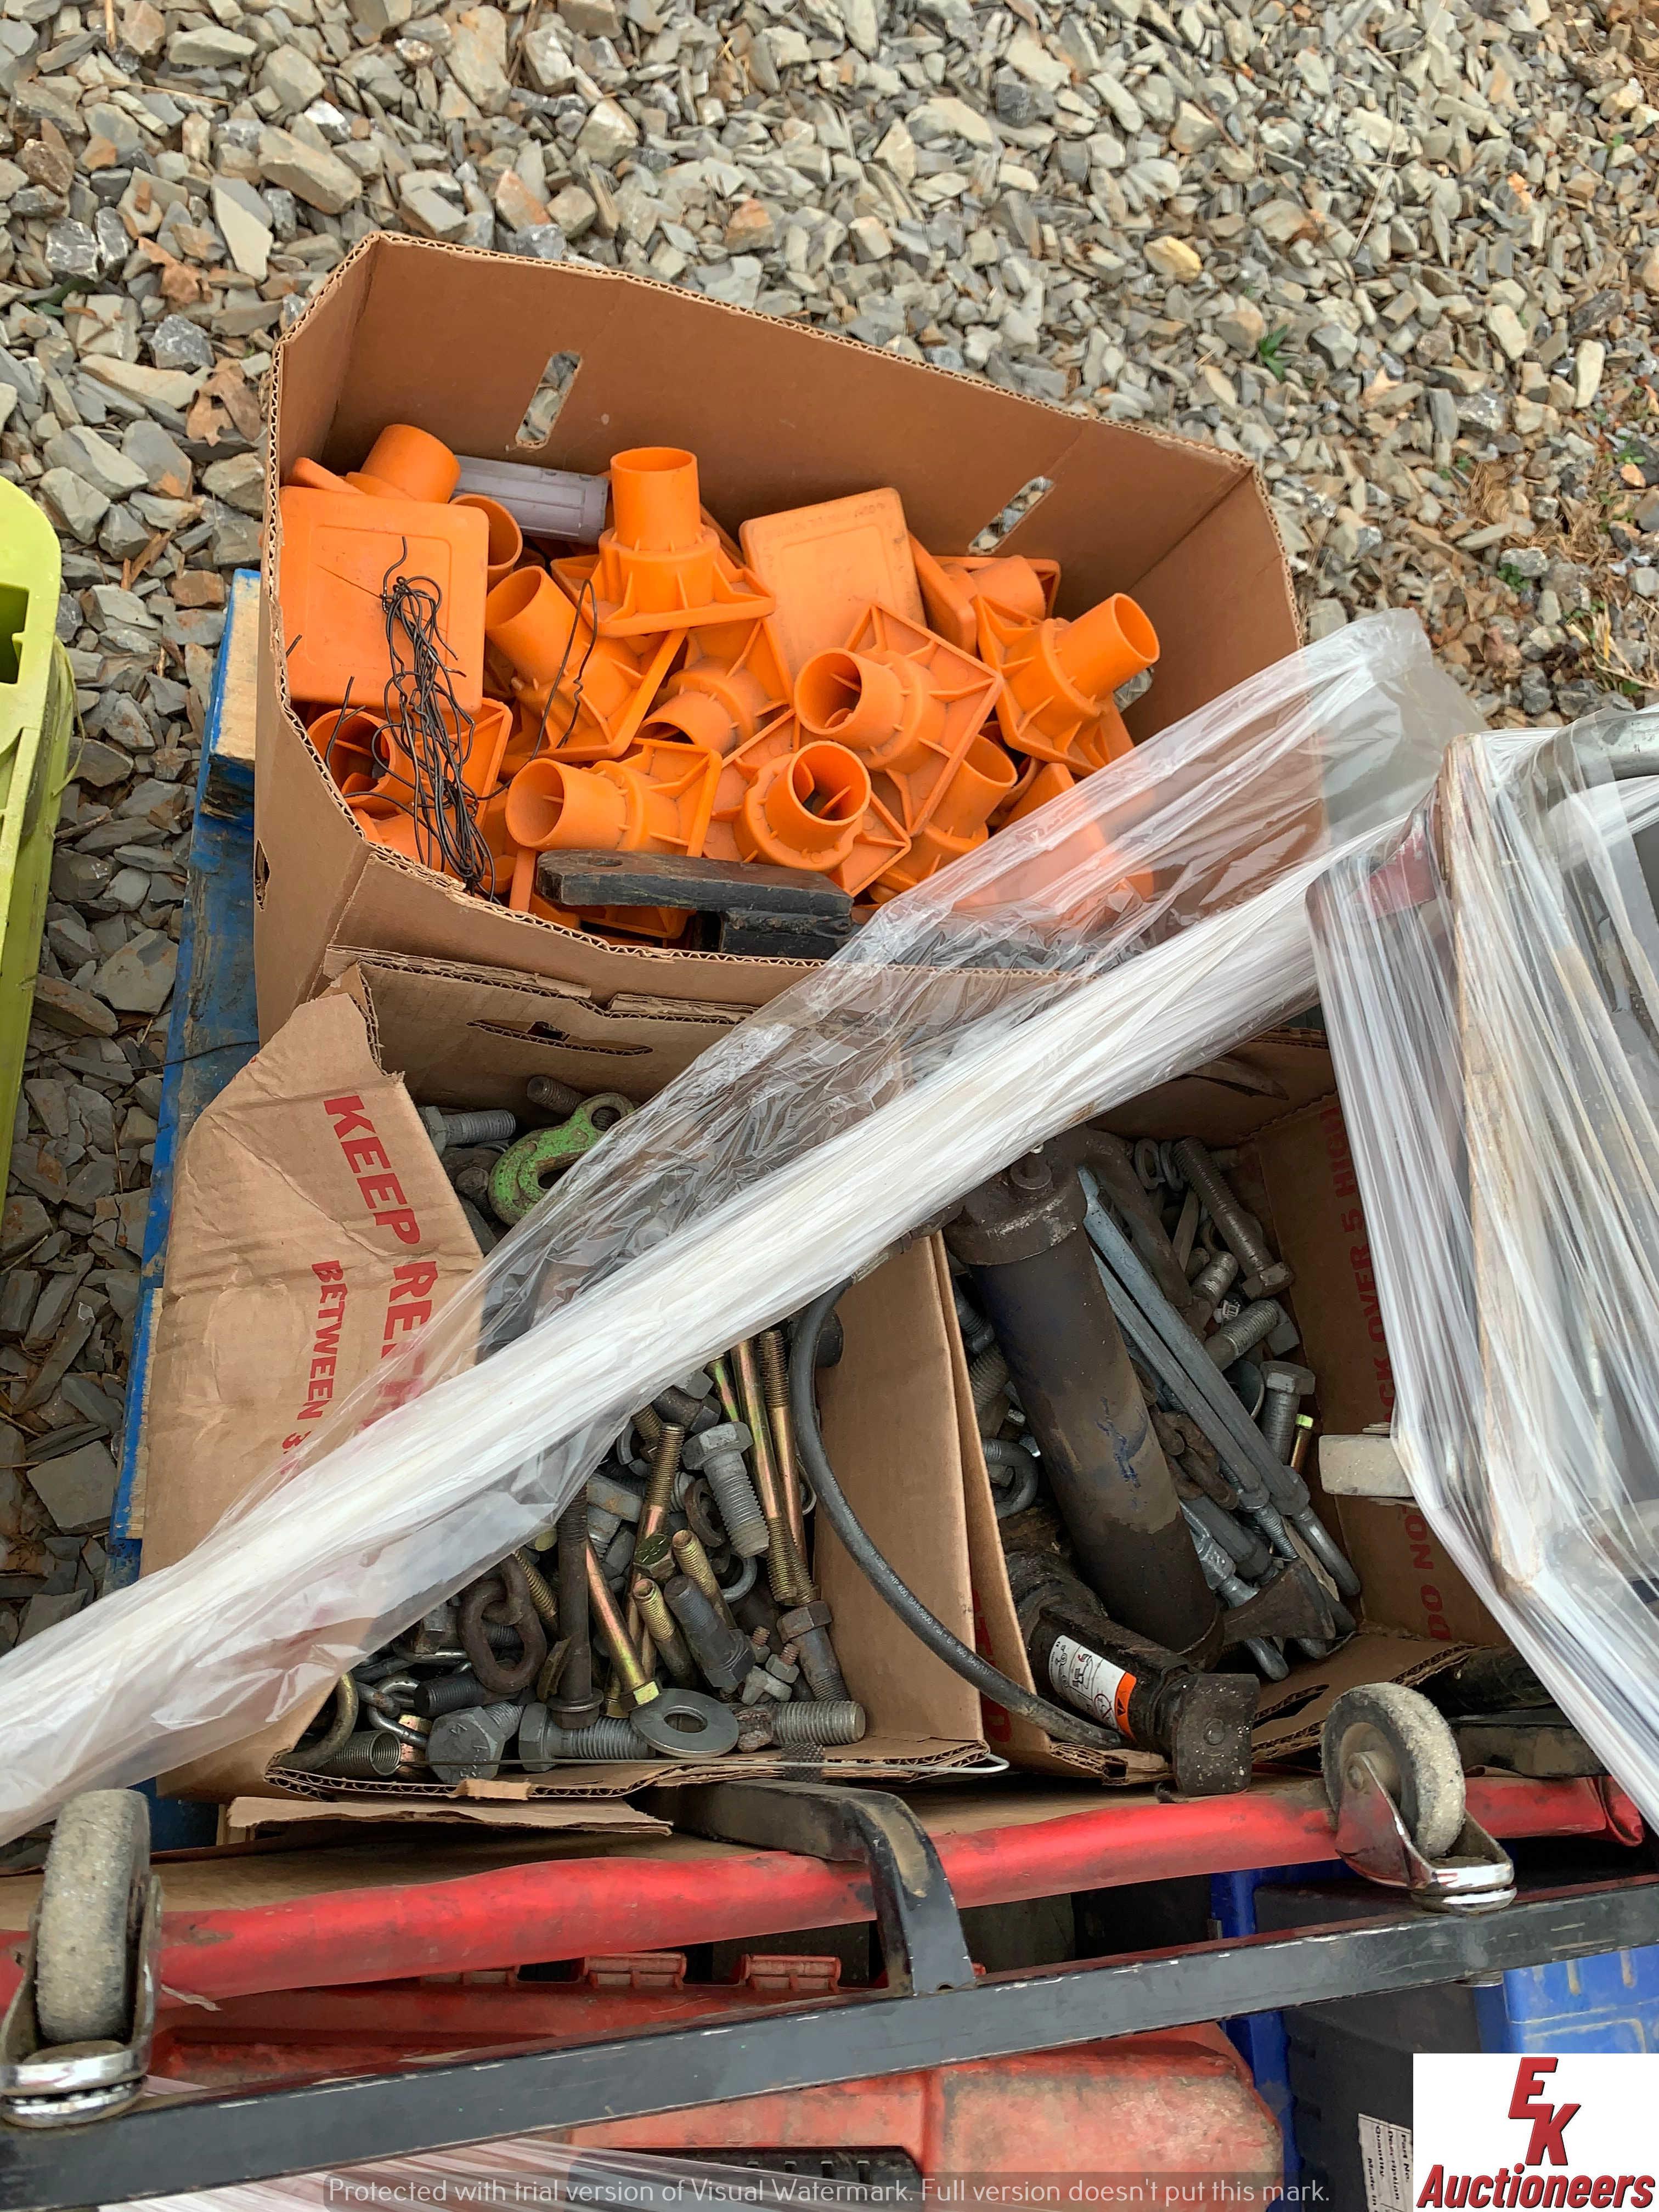 PALLET OF REBAR CAPS, MISC BOLTS & NUTS, CREEPERS, CONCRETE VIBRATOR, 2" SUBMERGIBLE WATER PUMP